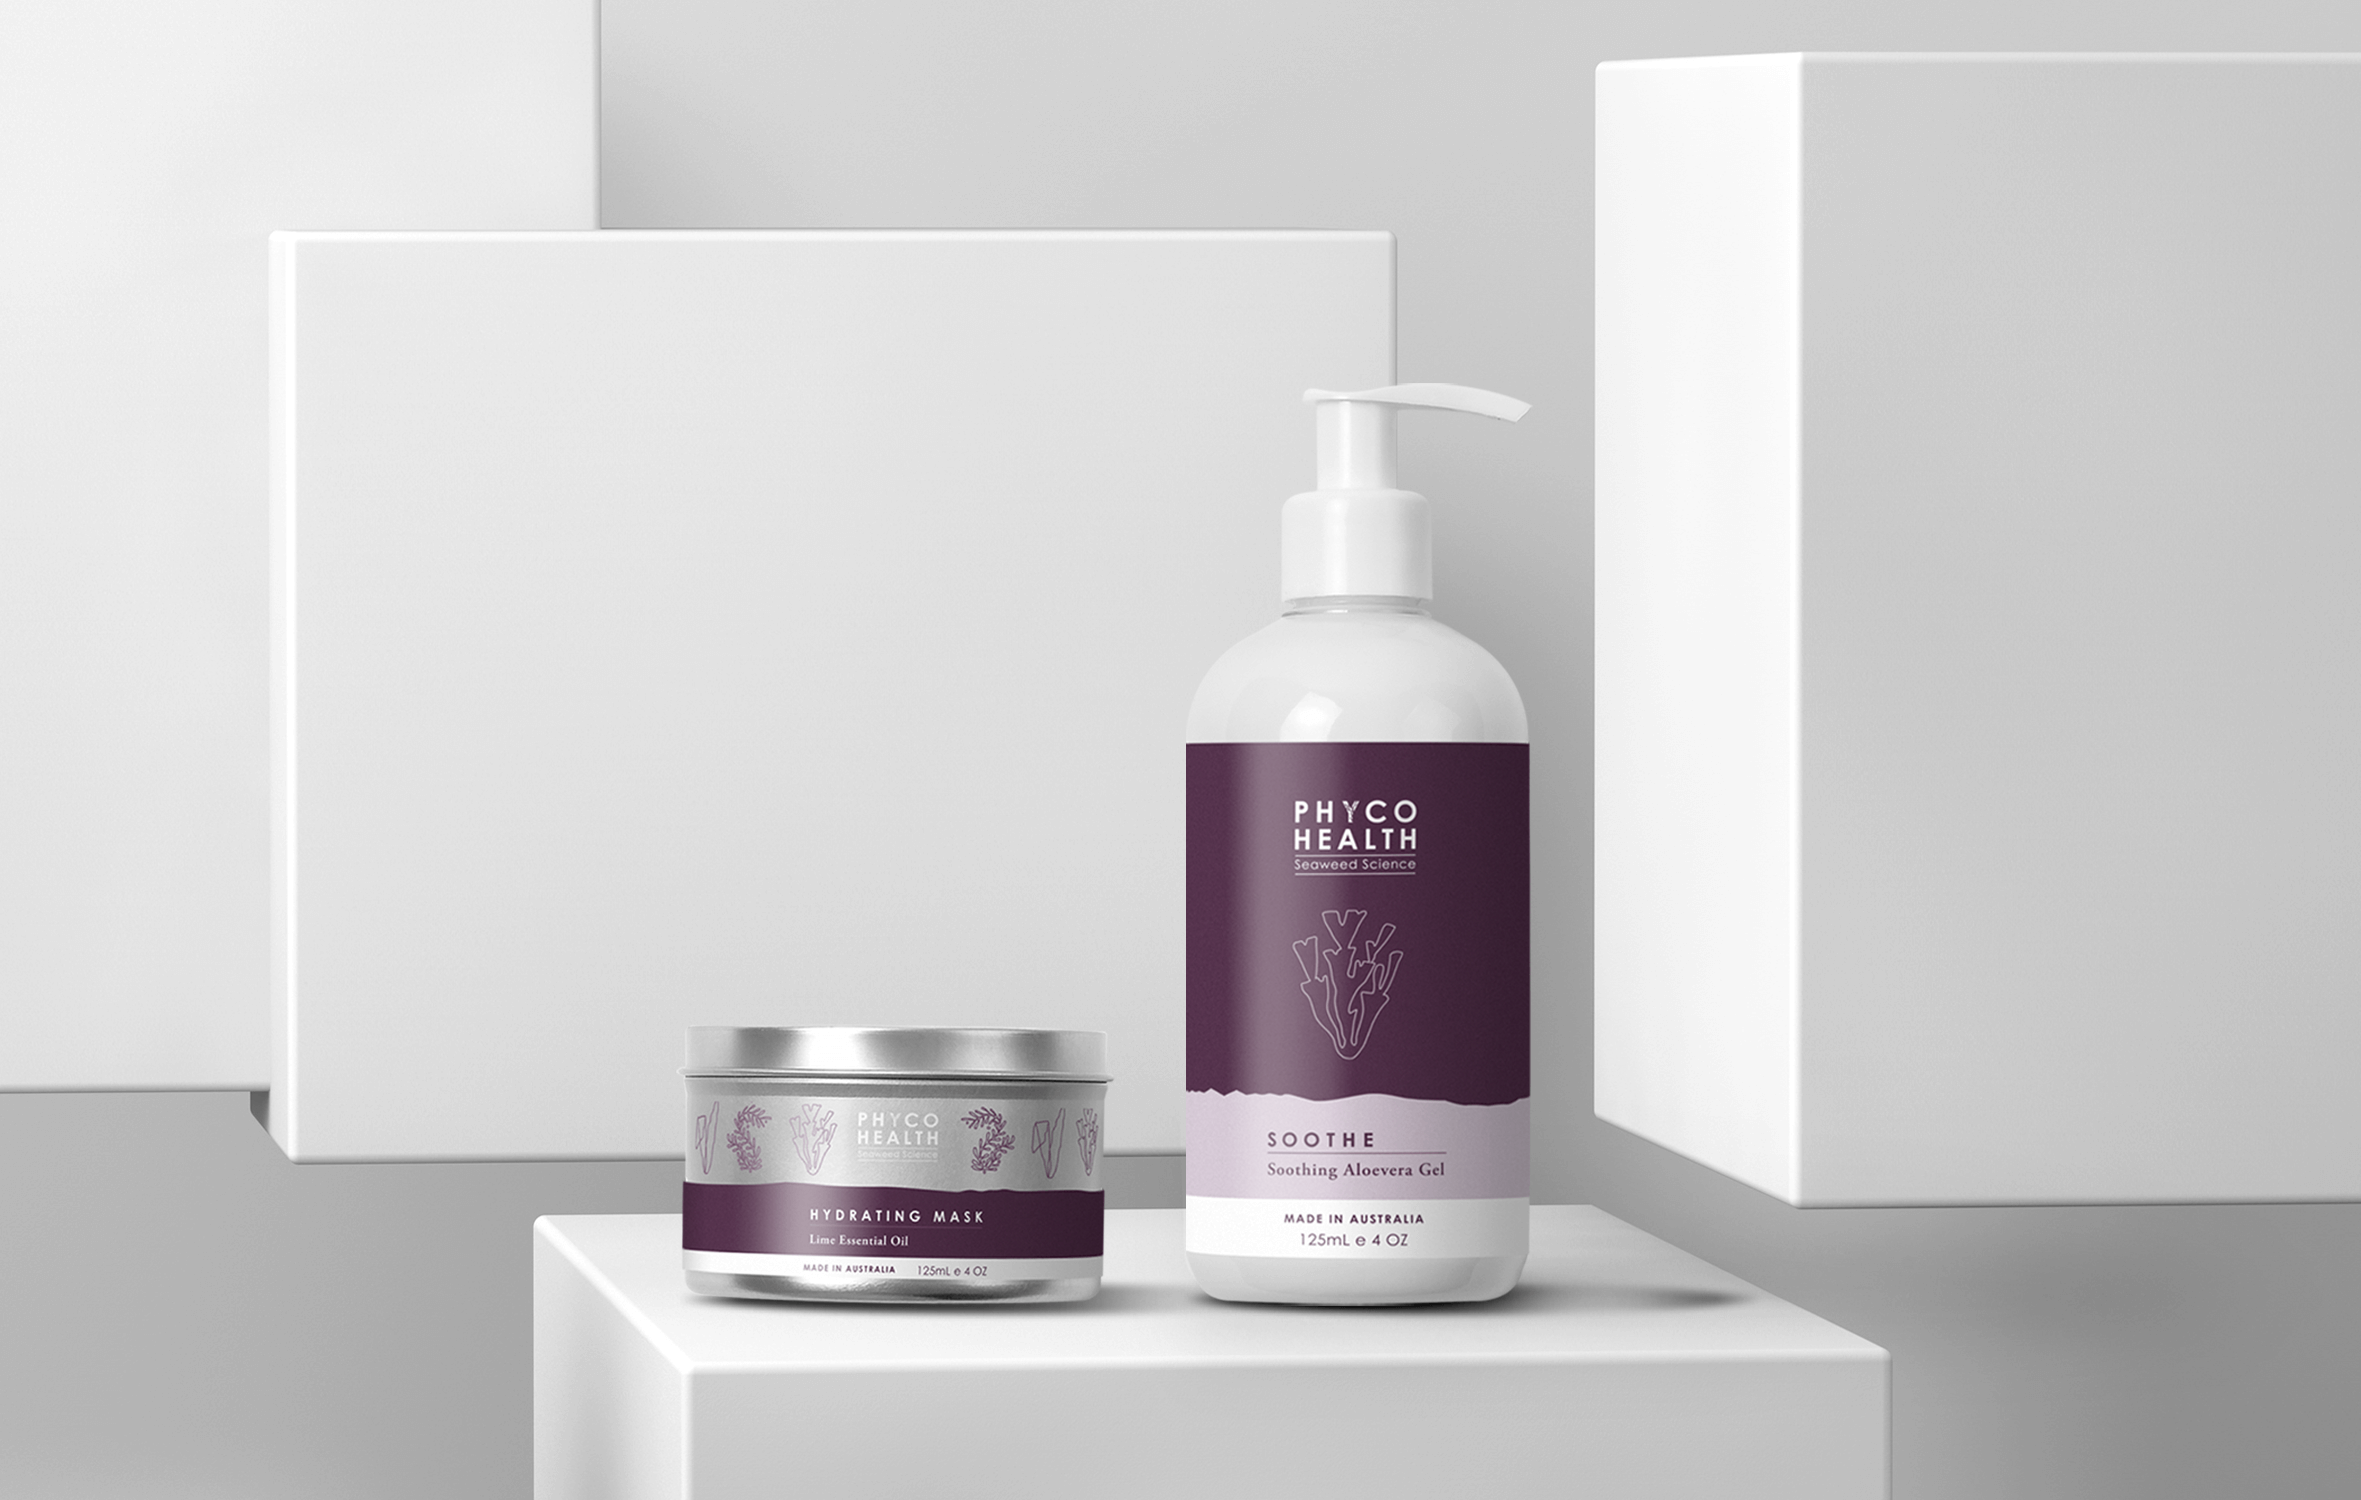 Branding and Packaging Design for Phycoderm